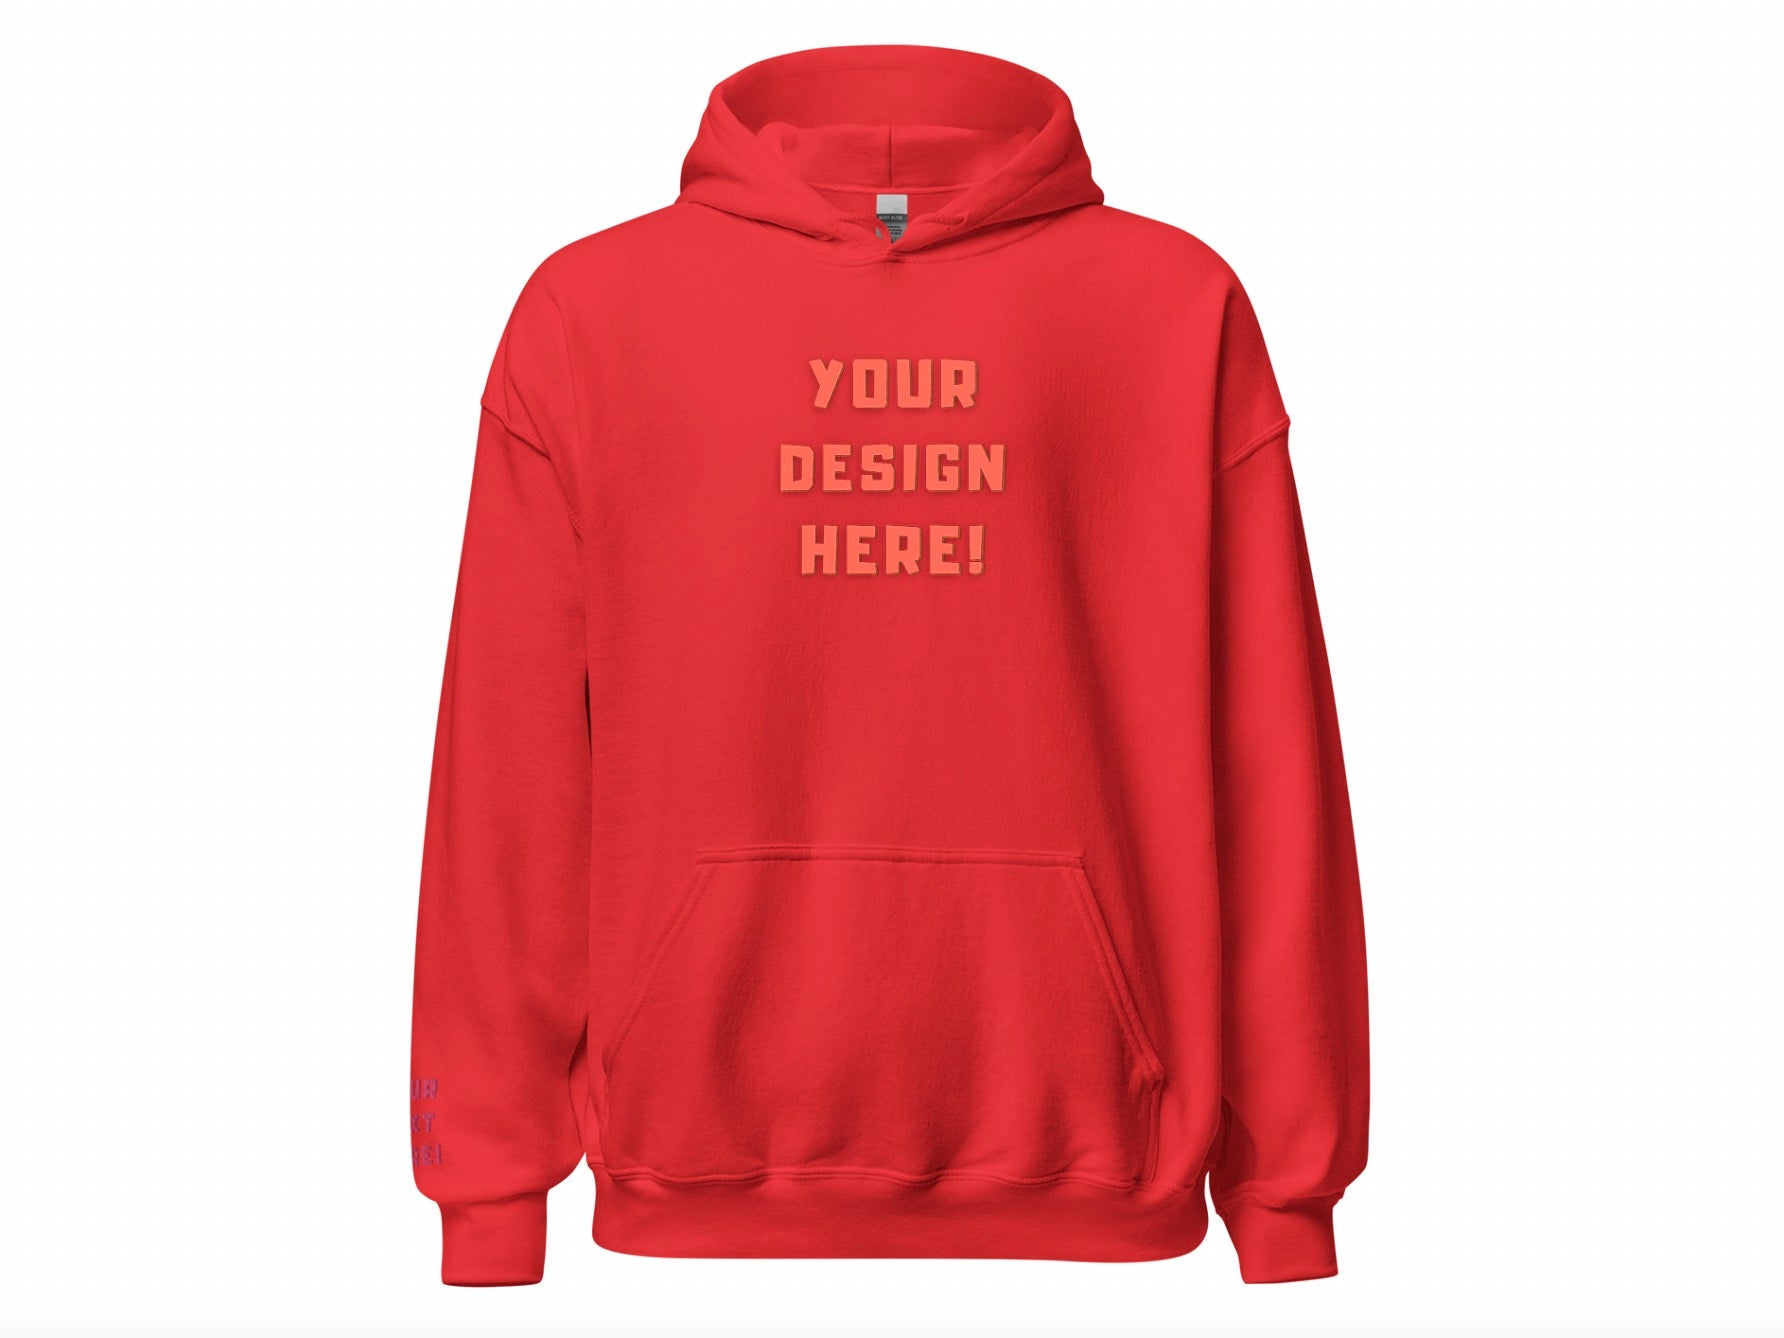 Custom adults embroidered red hoodie. Sleeve text is customizable. 